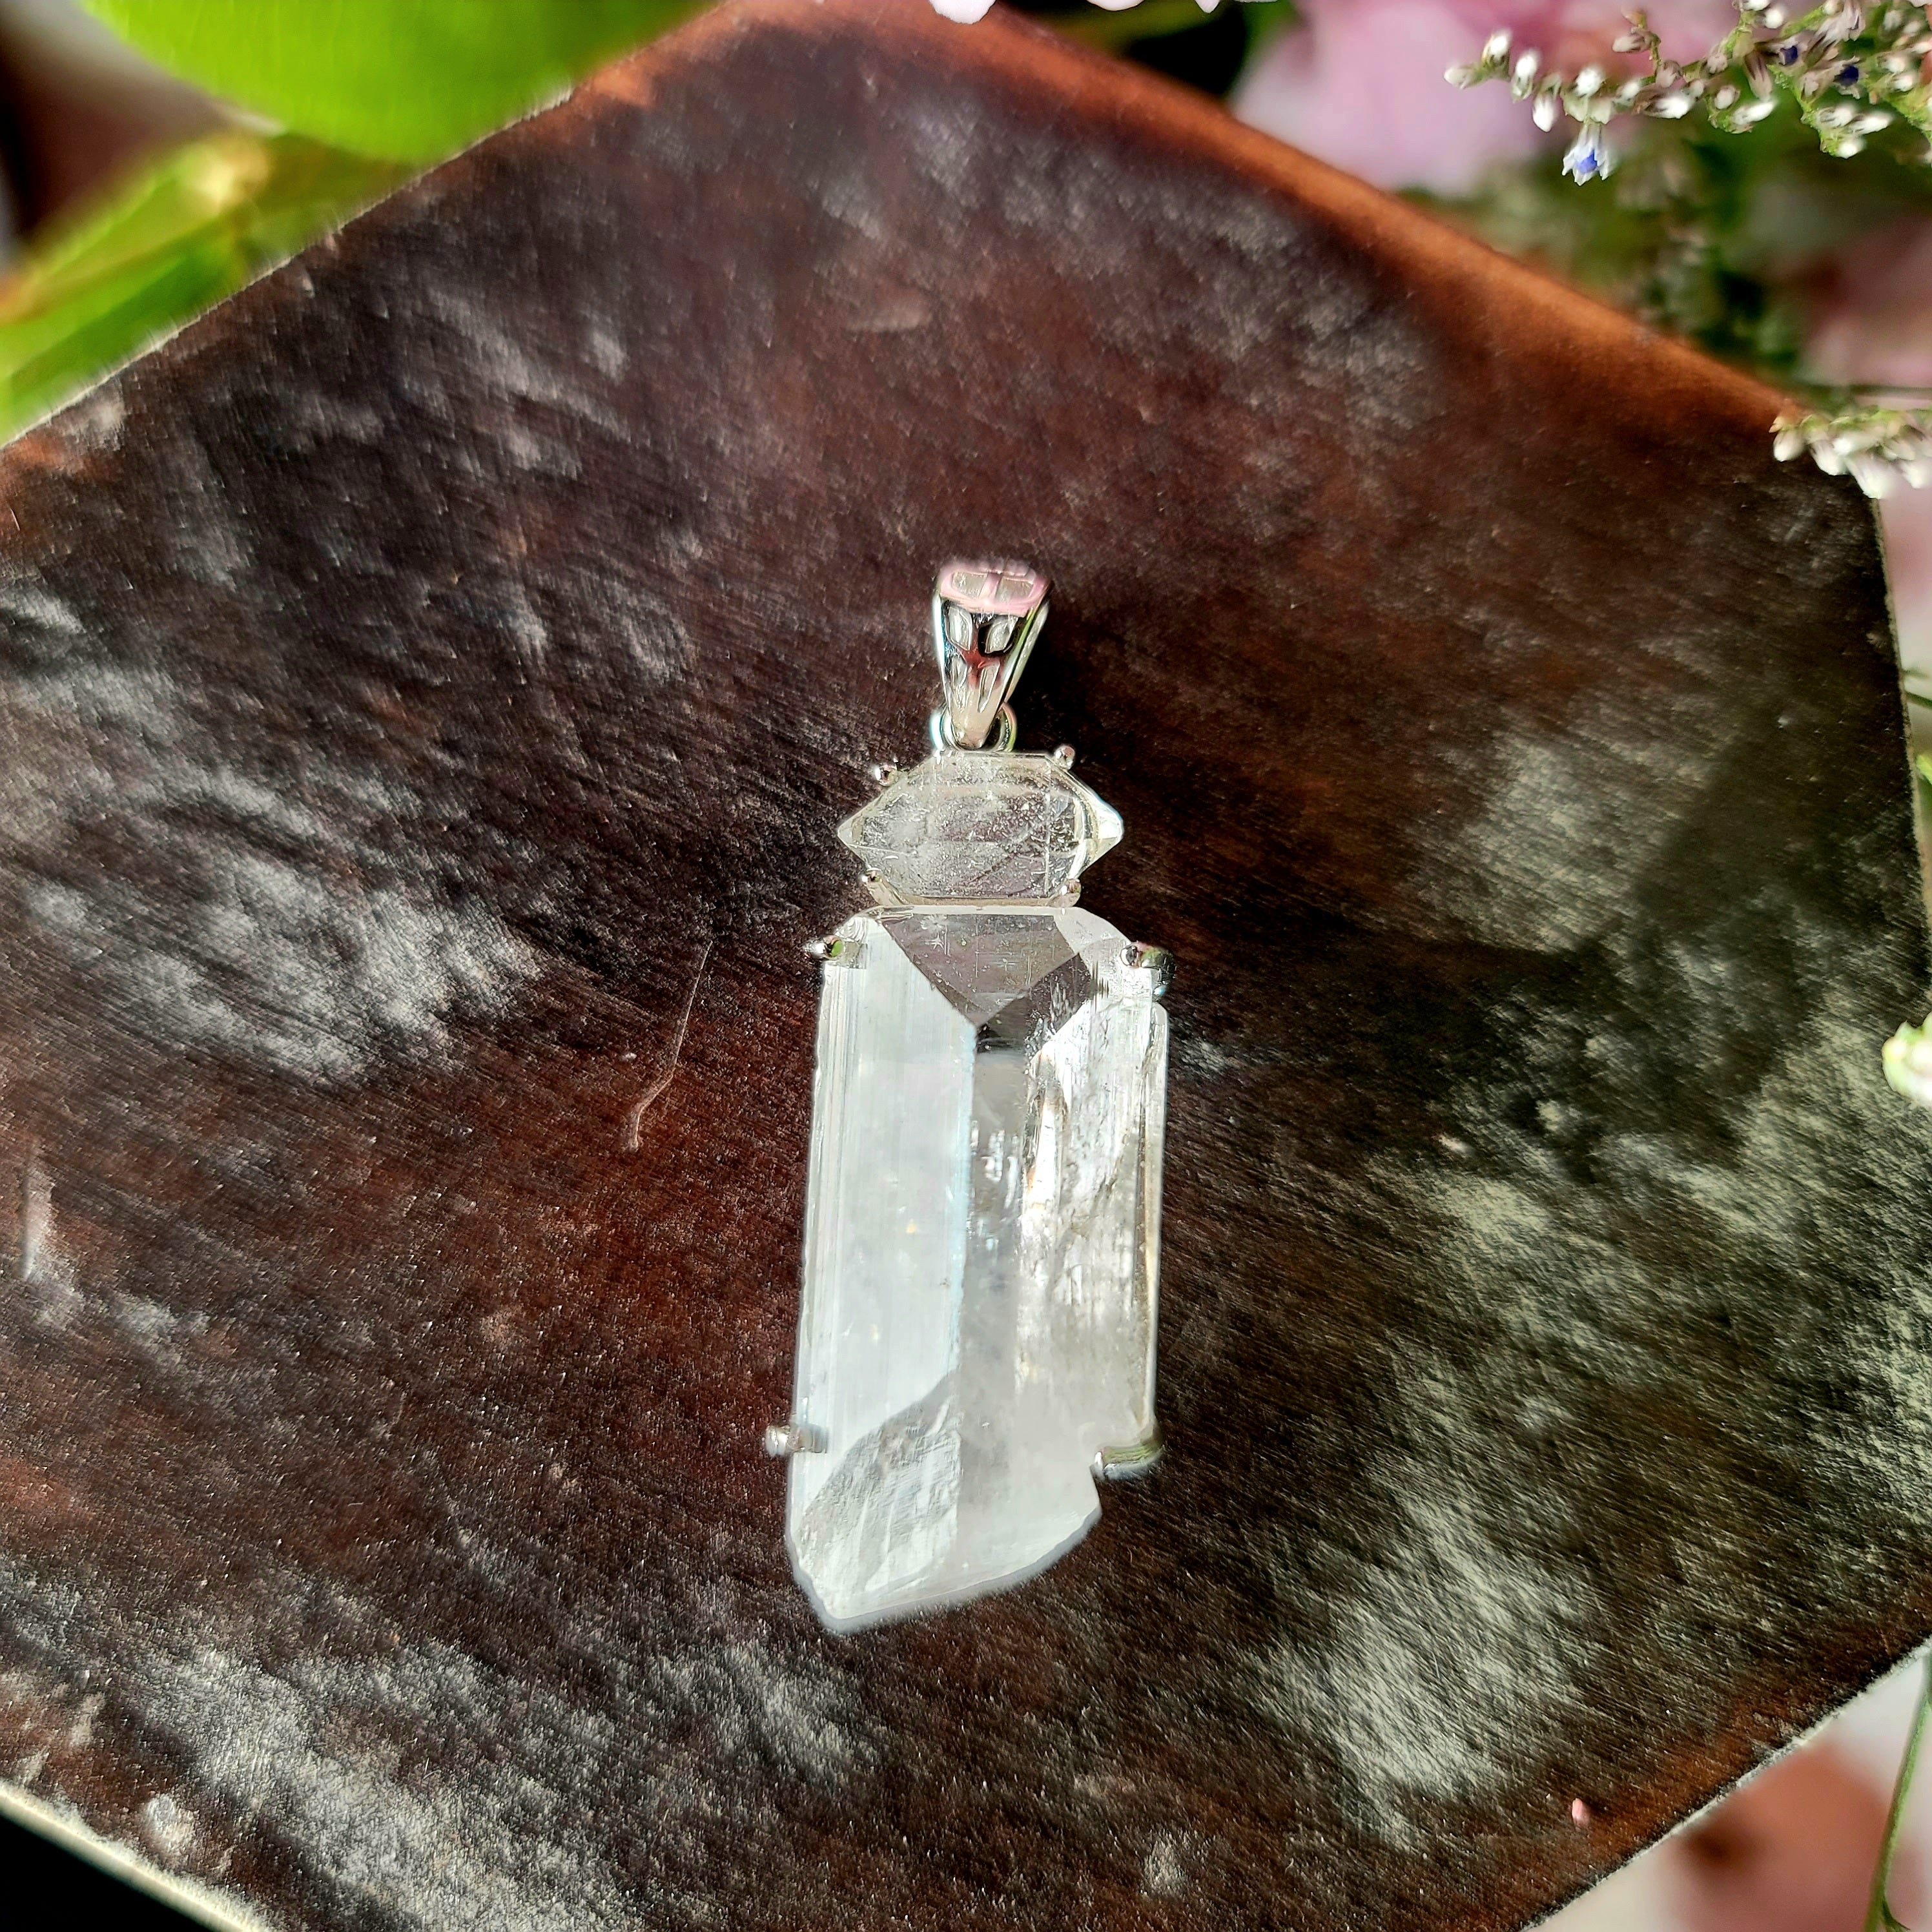 Danburite x Herkimer Diamond Pendant .925 Silver for Connection with Higher Realms, Peace and Self Acceptance